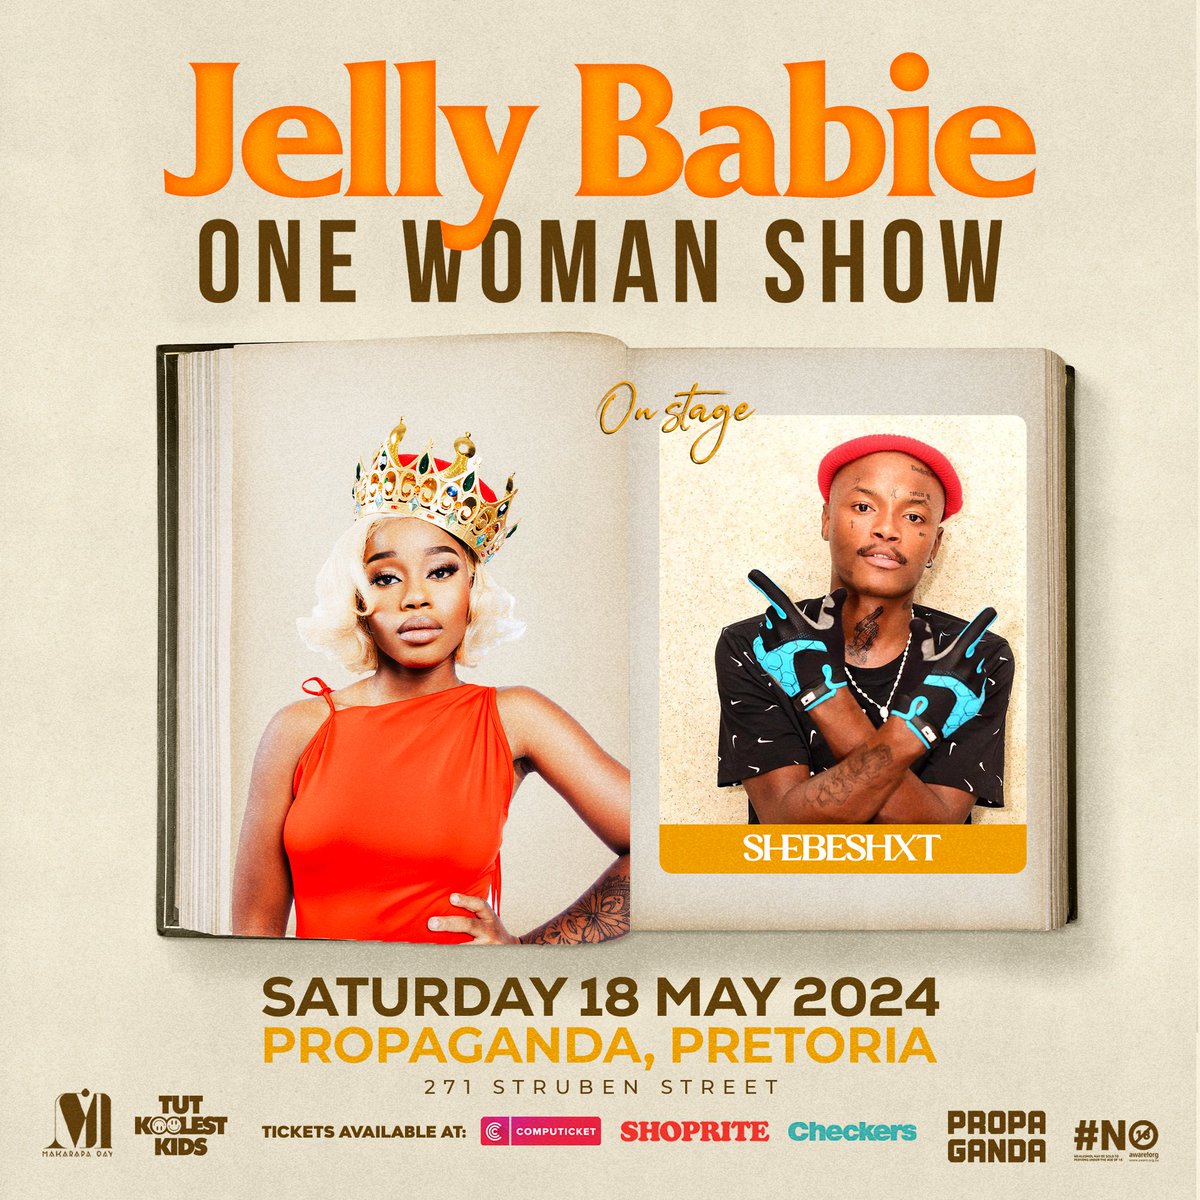 Are you ready for #JellyBabieAtPropaganda One Woman Show because I know I definitely am and the line up is fire!! Come see the likes of Shebeshxt, Focalistic, Cyan Boujee and many more doing their thing

Get your tickets here:

computicket-boxoffice.com/e/jelly-babie-…